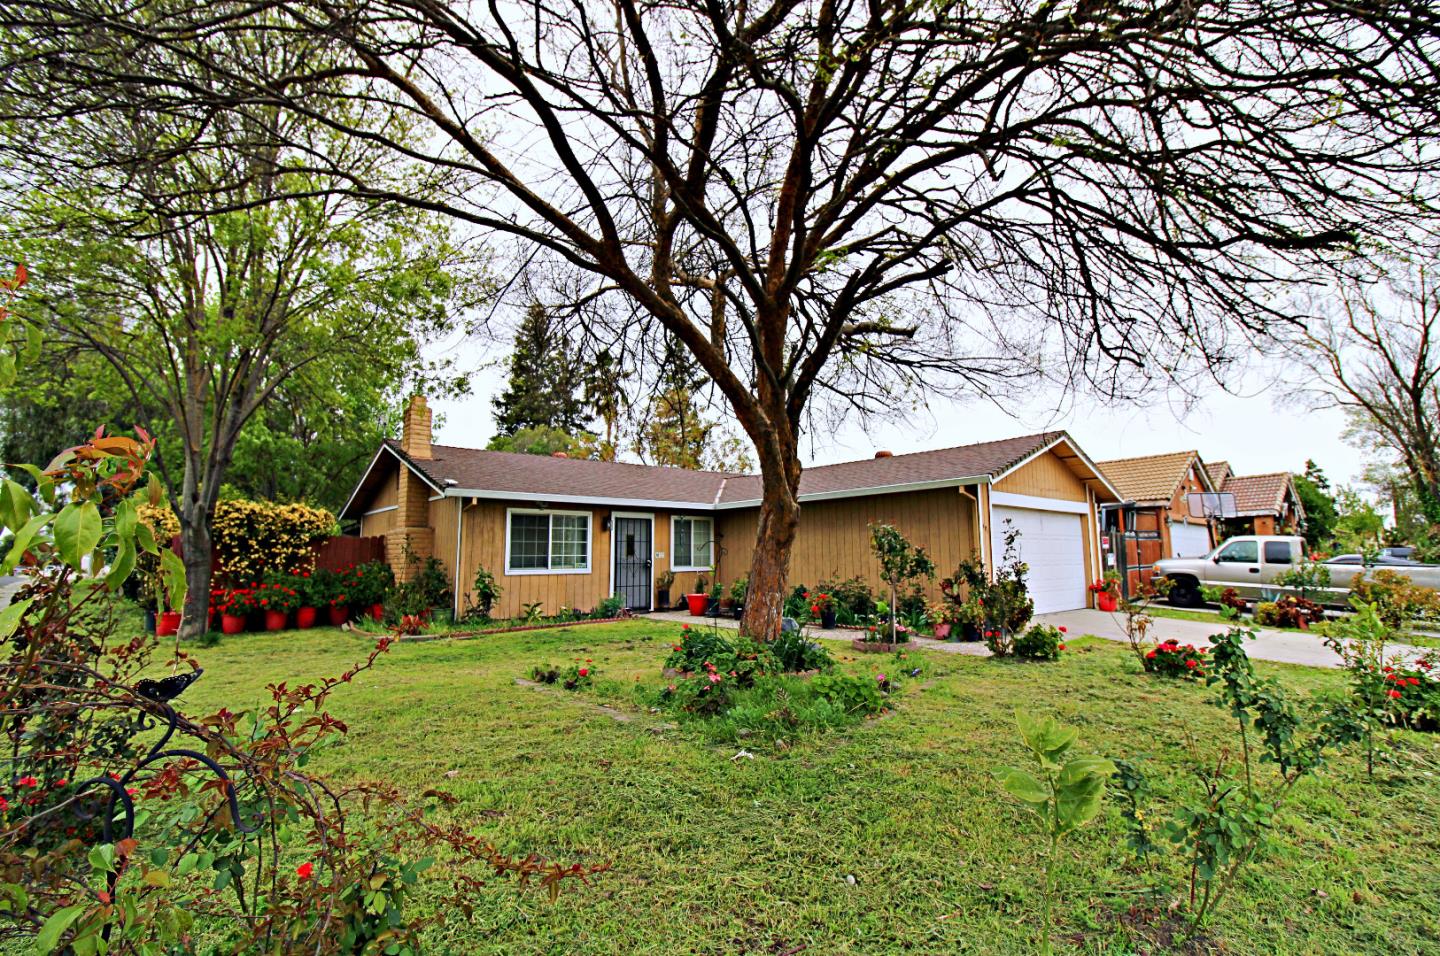 Photo of 2401 Pyrenees Ave in Stockton, CA